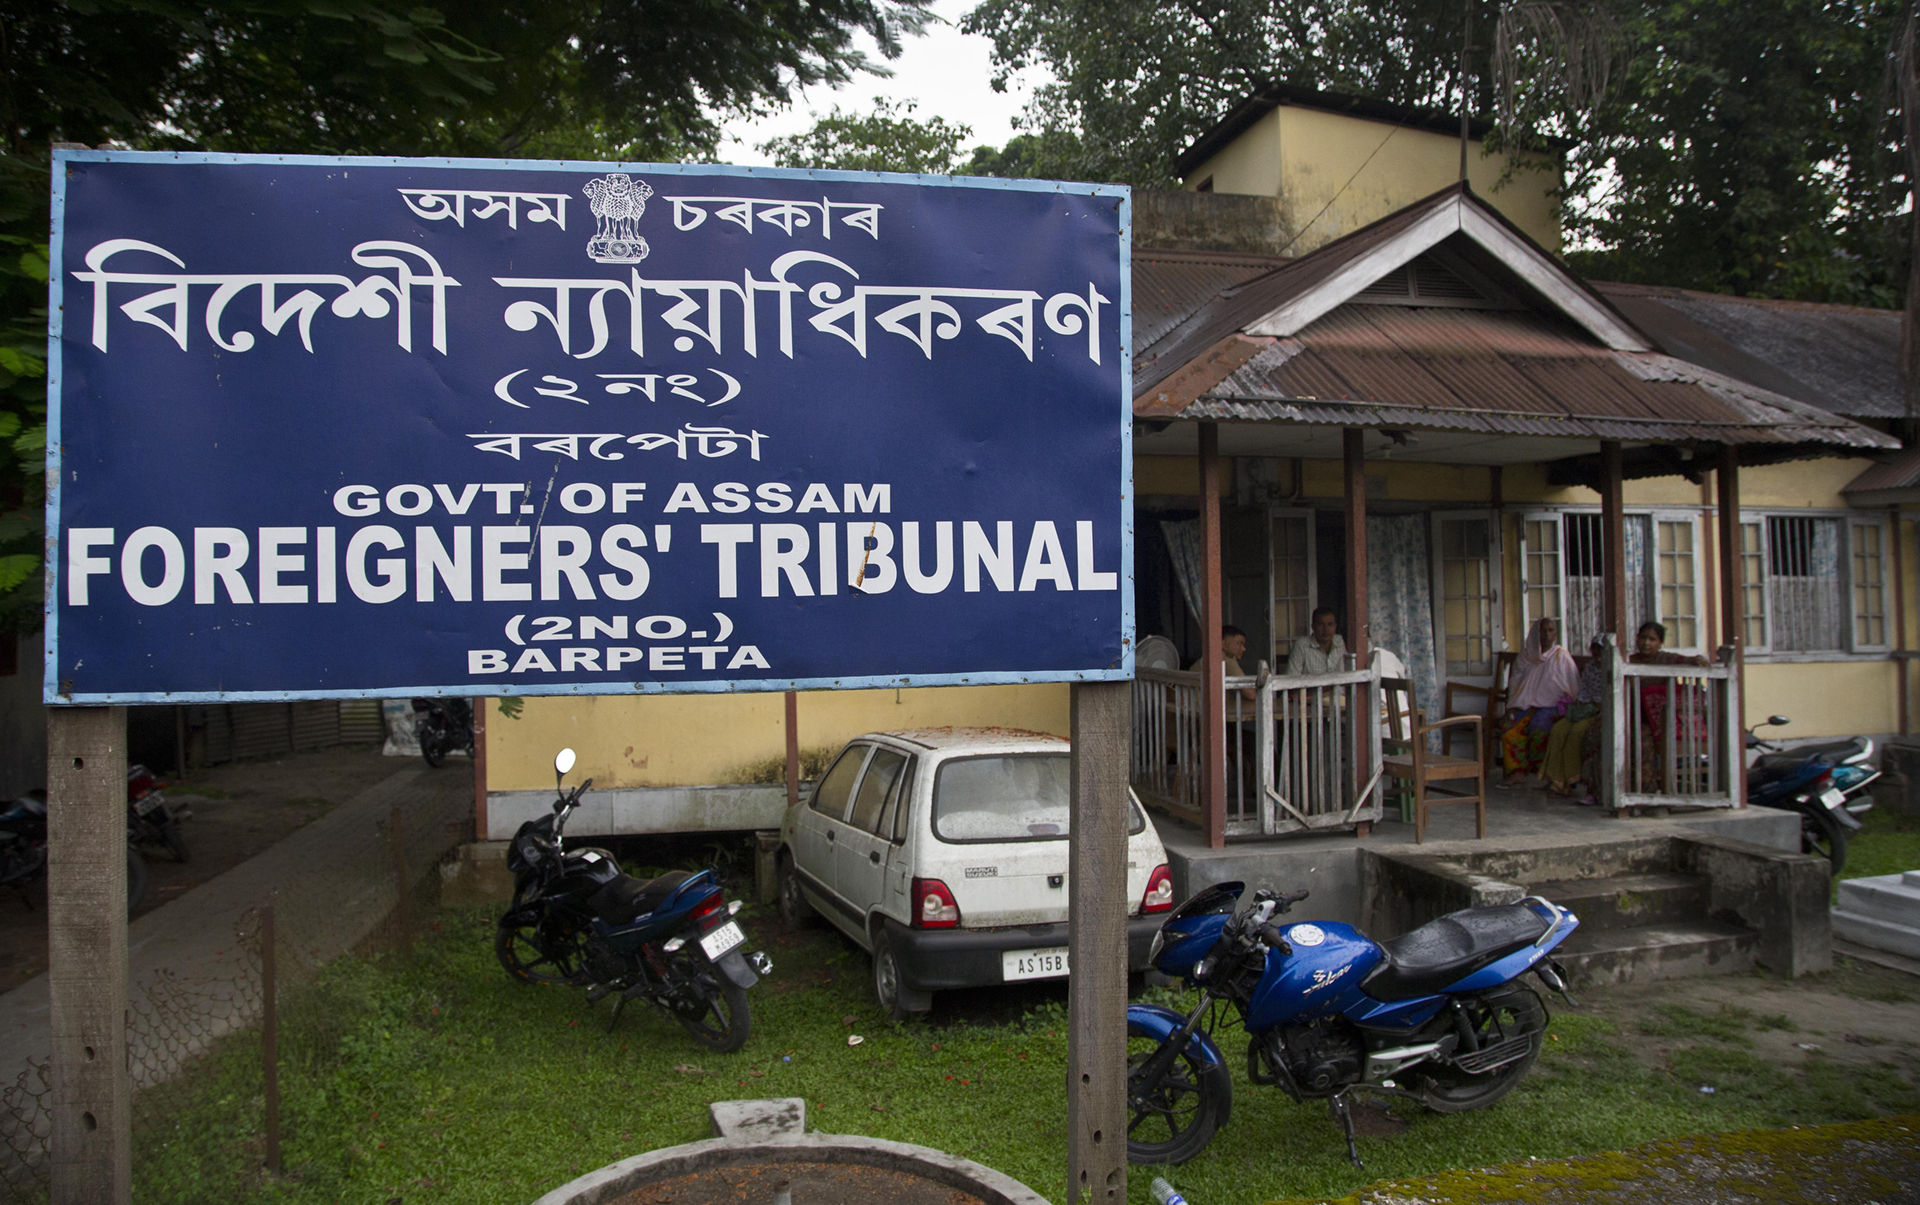 How Assam’s Foreigners Tribunals, aided by the high court, function like kangaroo courts and persecute its minorities